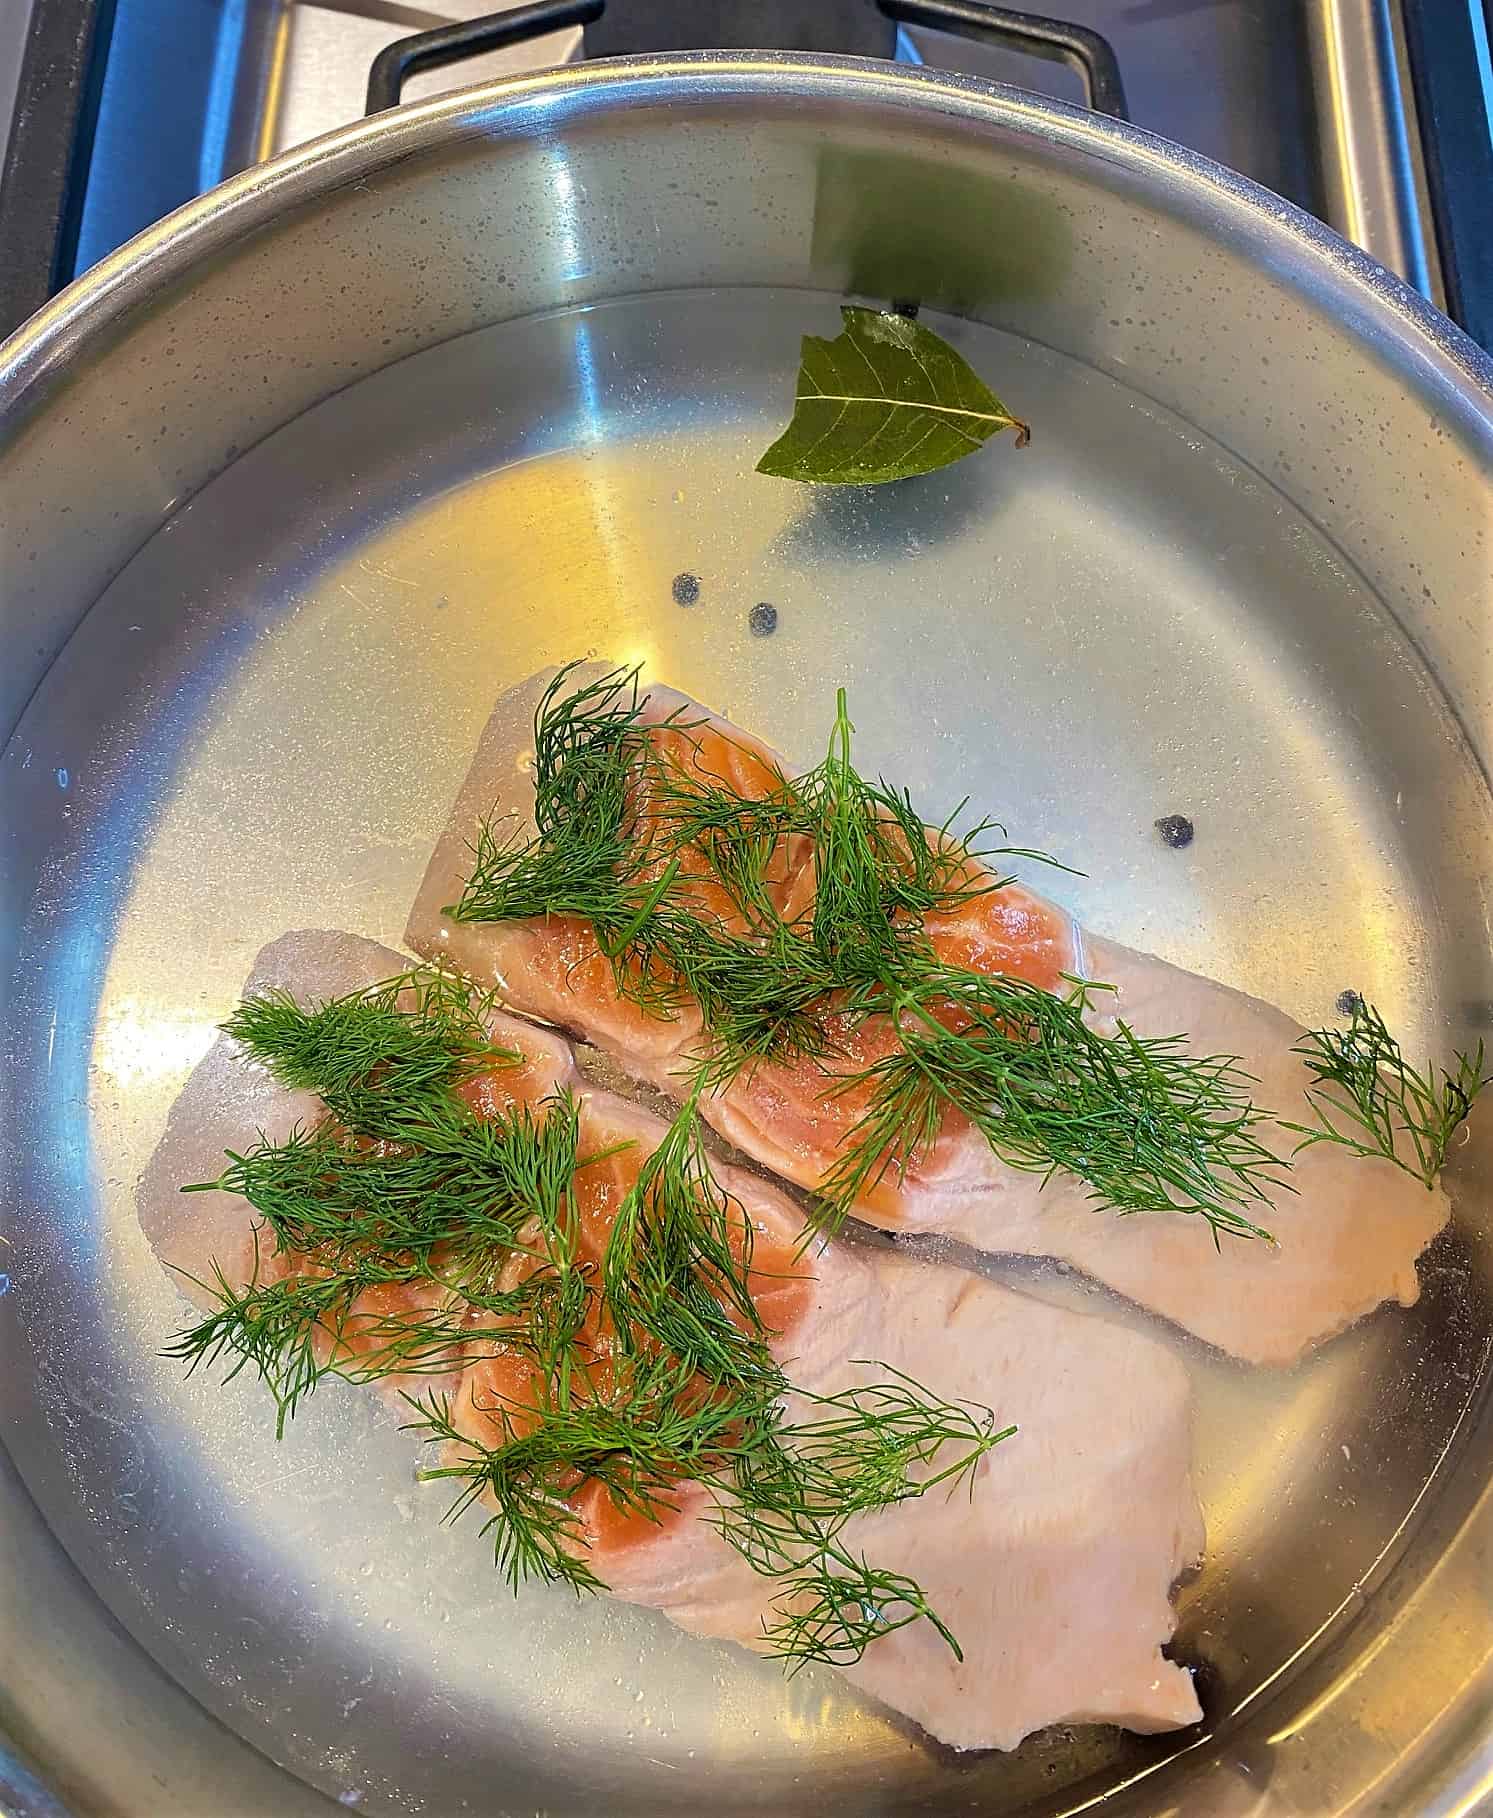 Salmon fillets in a skillet of water topped with dill